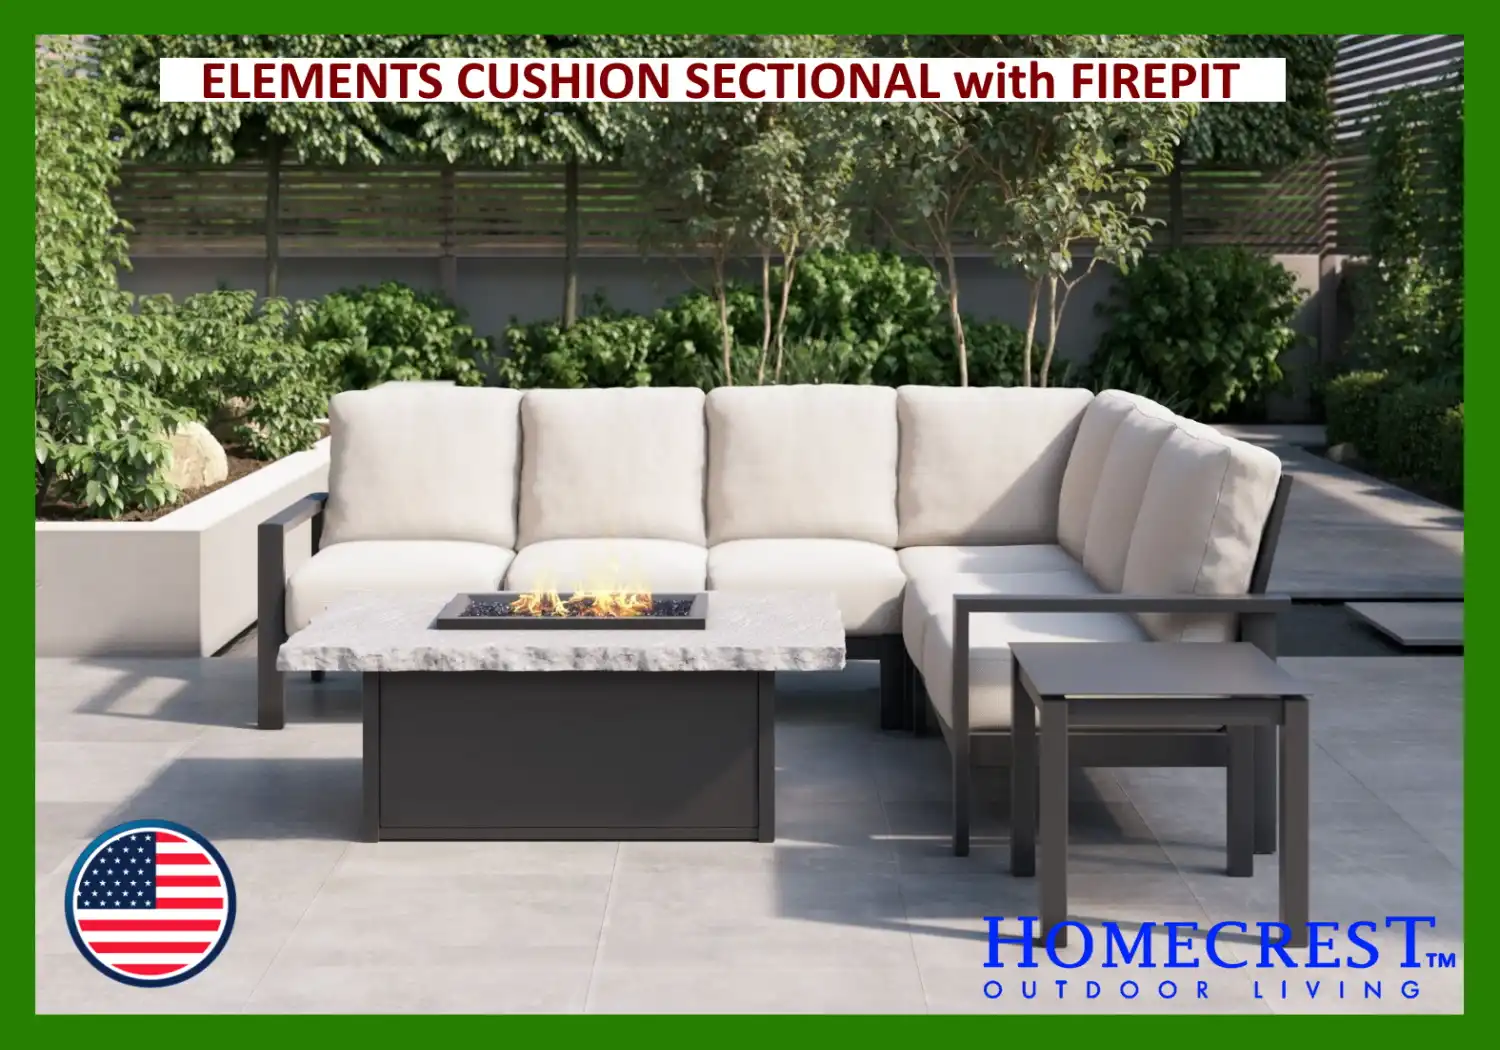 ELEMENTS CUSHION SECTIONAL with FIREPIT